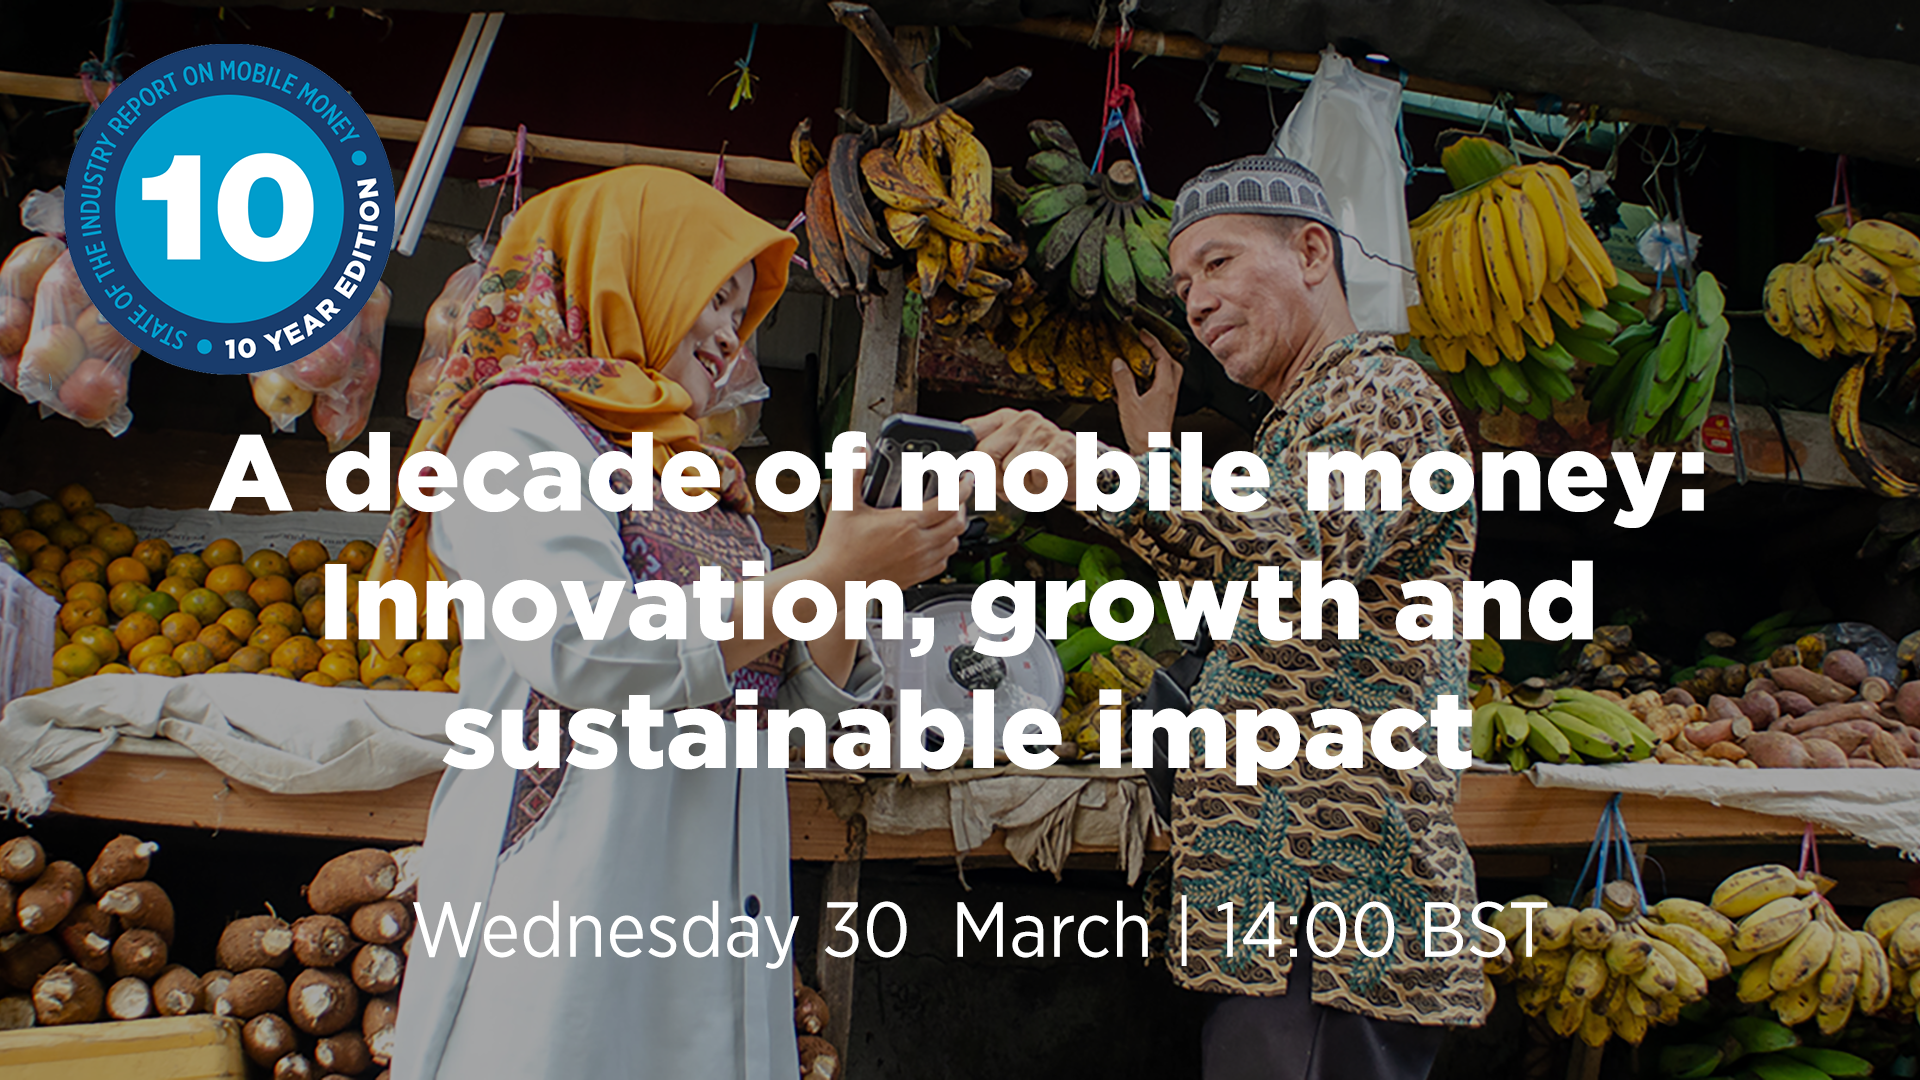 A decade of mobile money: Innovation, growth and sustainable impact